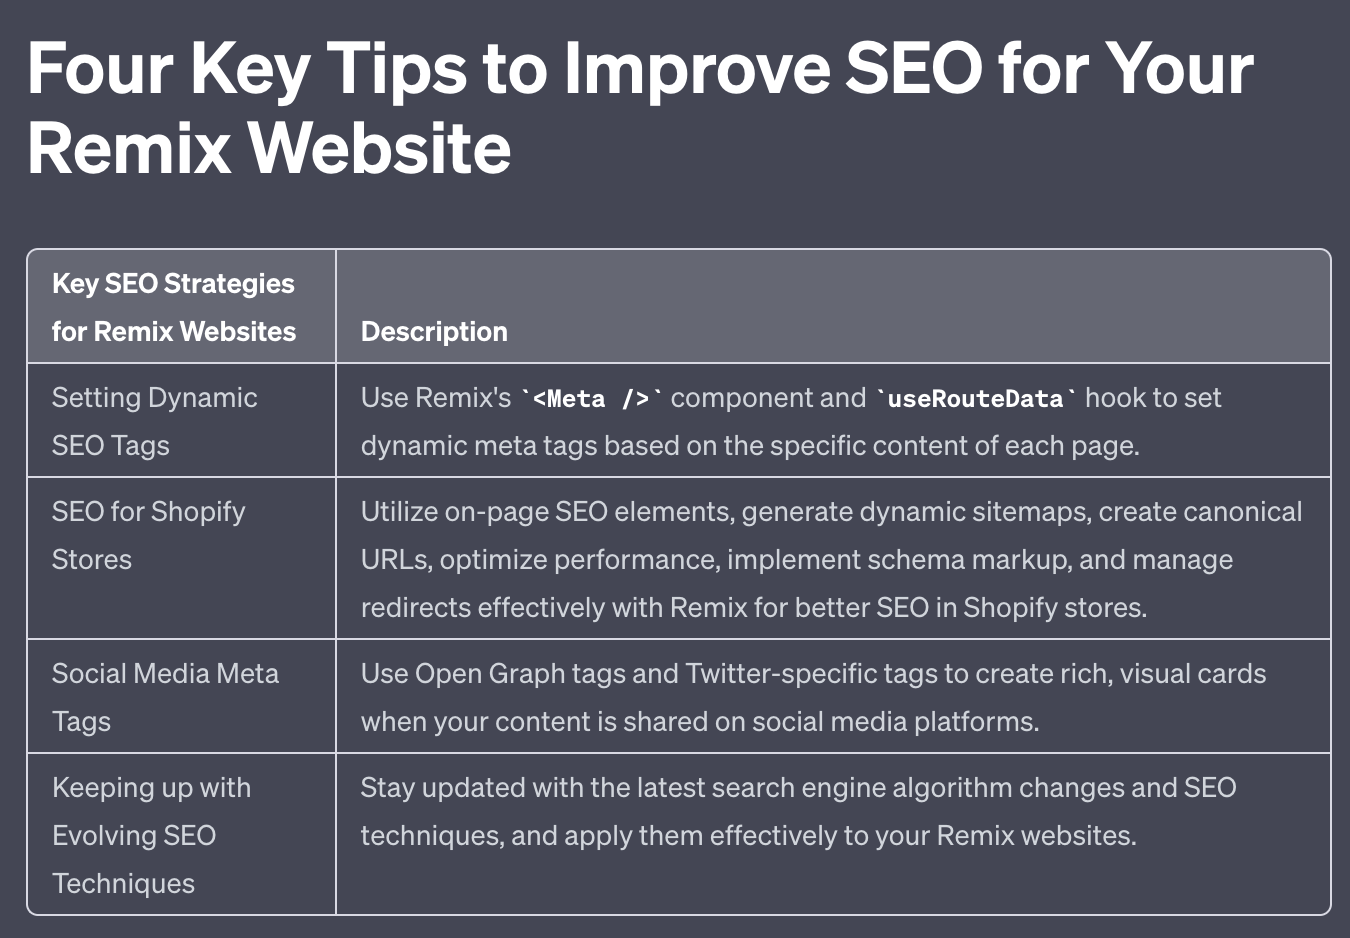 Table of tips for improving SEO for Remix websites. 